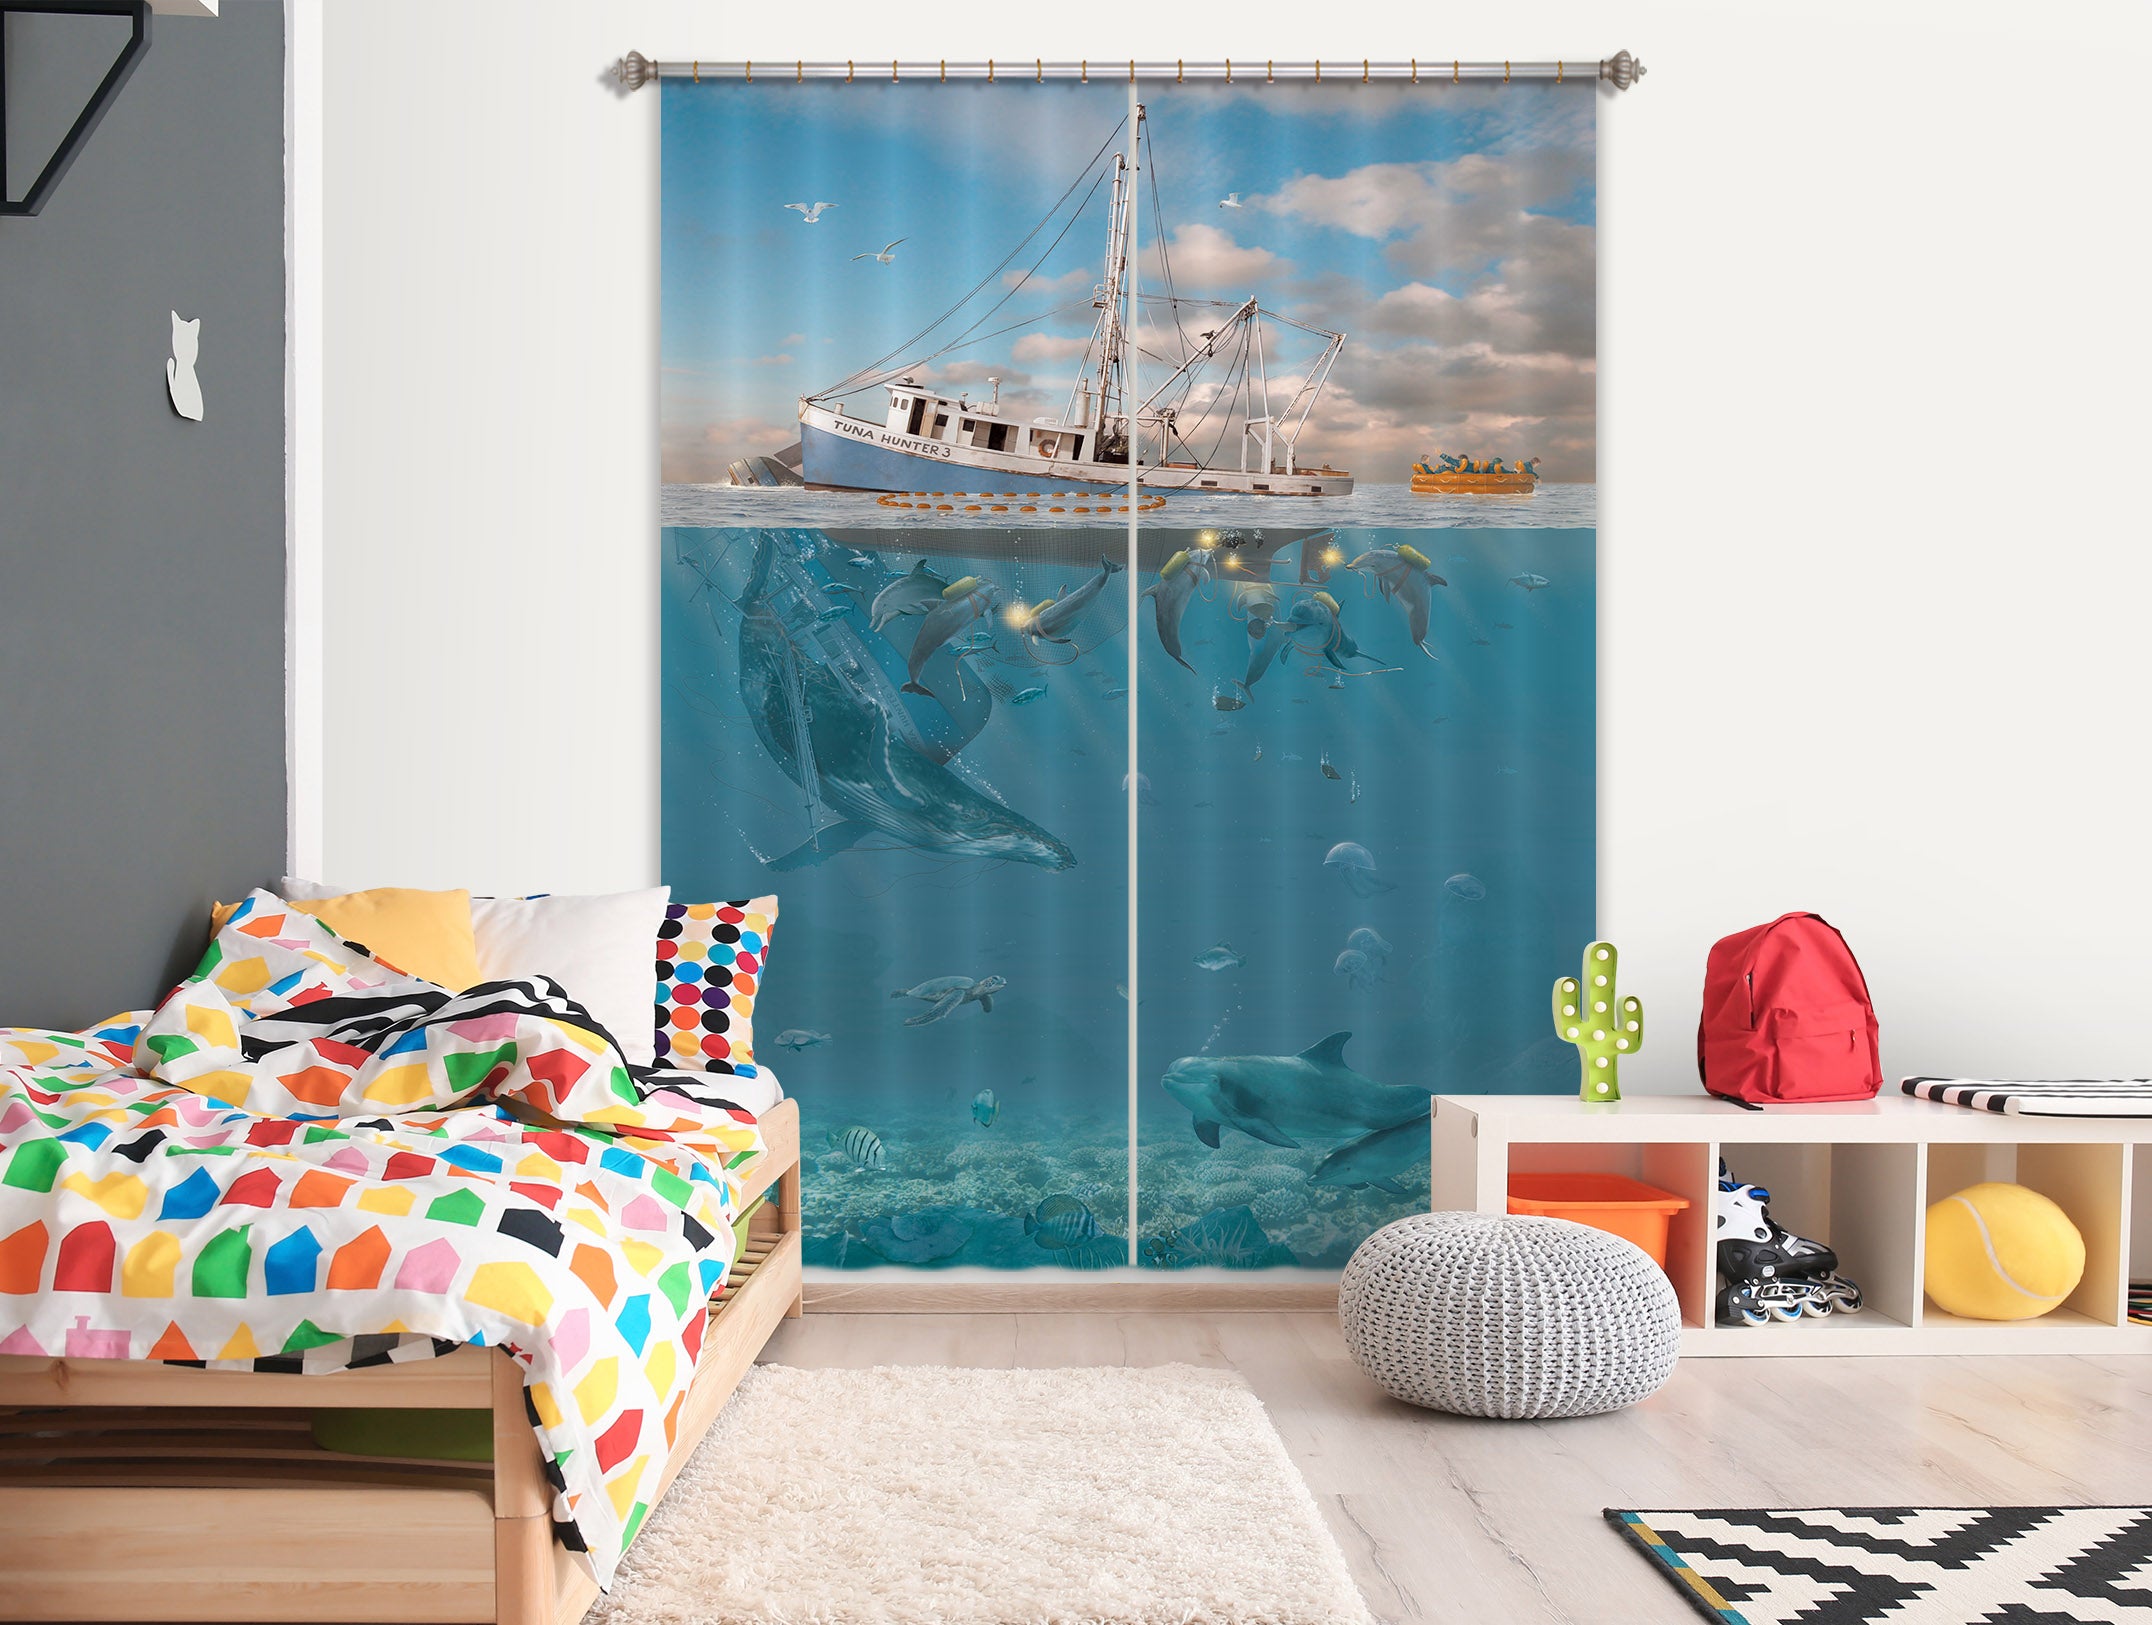 3D Rage Of The Dolphin 063 Vincent Hie Curtain Curtains Drapes